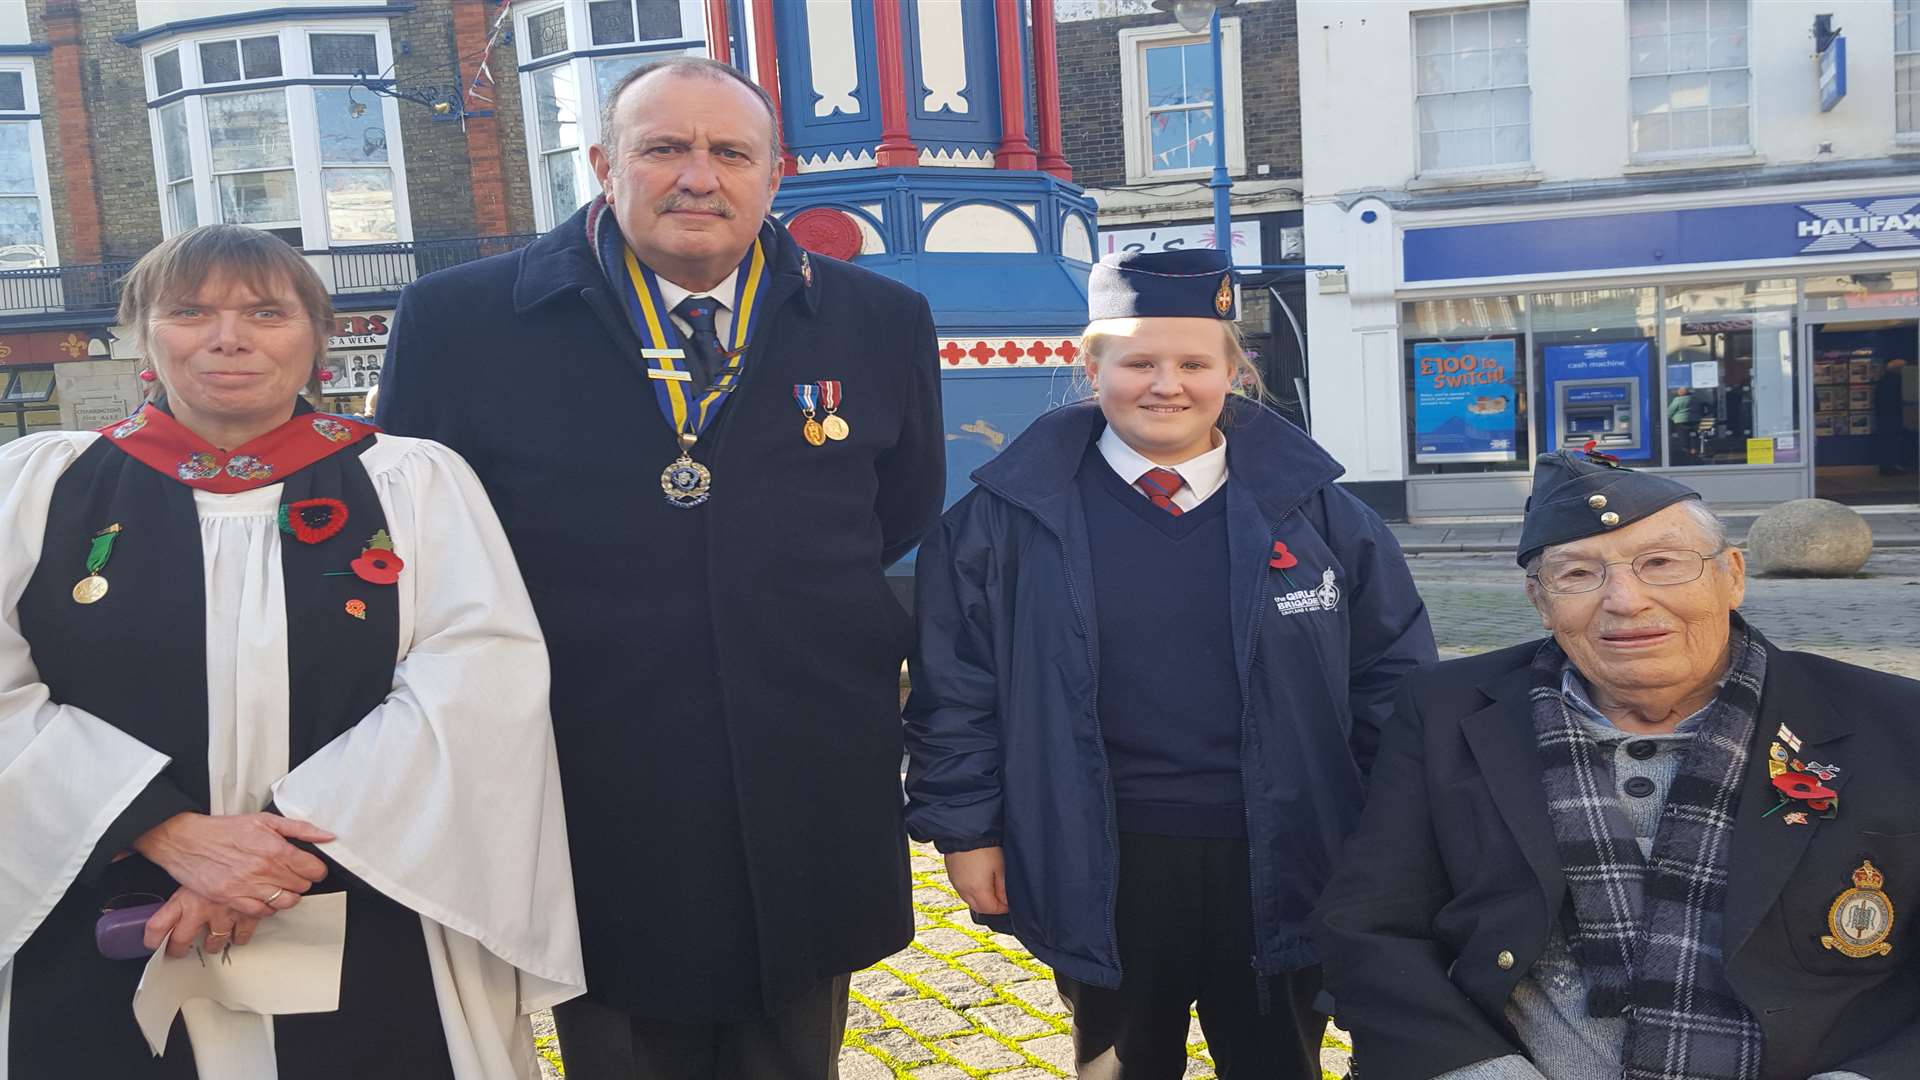 Town centre chaplain Jeanette McLaren, Ian Goodwin, of the Sheppey branch of the Royal British Legion, bugler Emily Collins, 16, of the girls' brigade and RAF veteran Ernie Hope, 86, ahead of the November 11 service at the clocktower, Sheerness